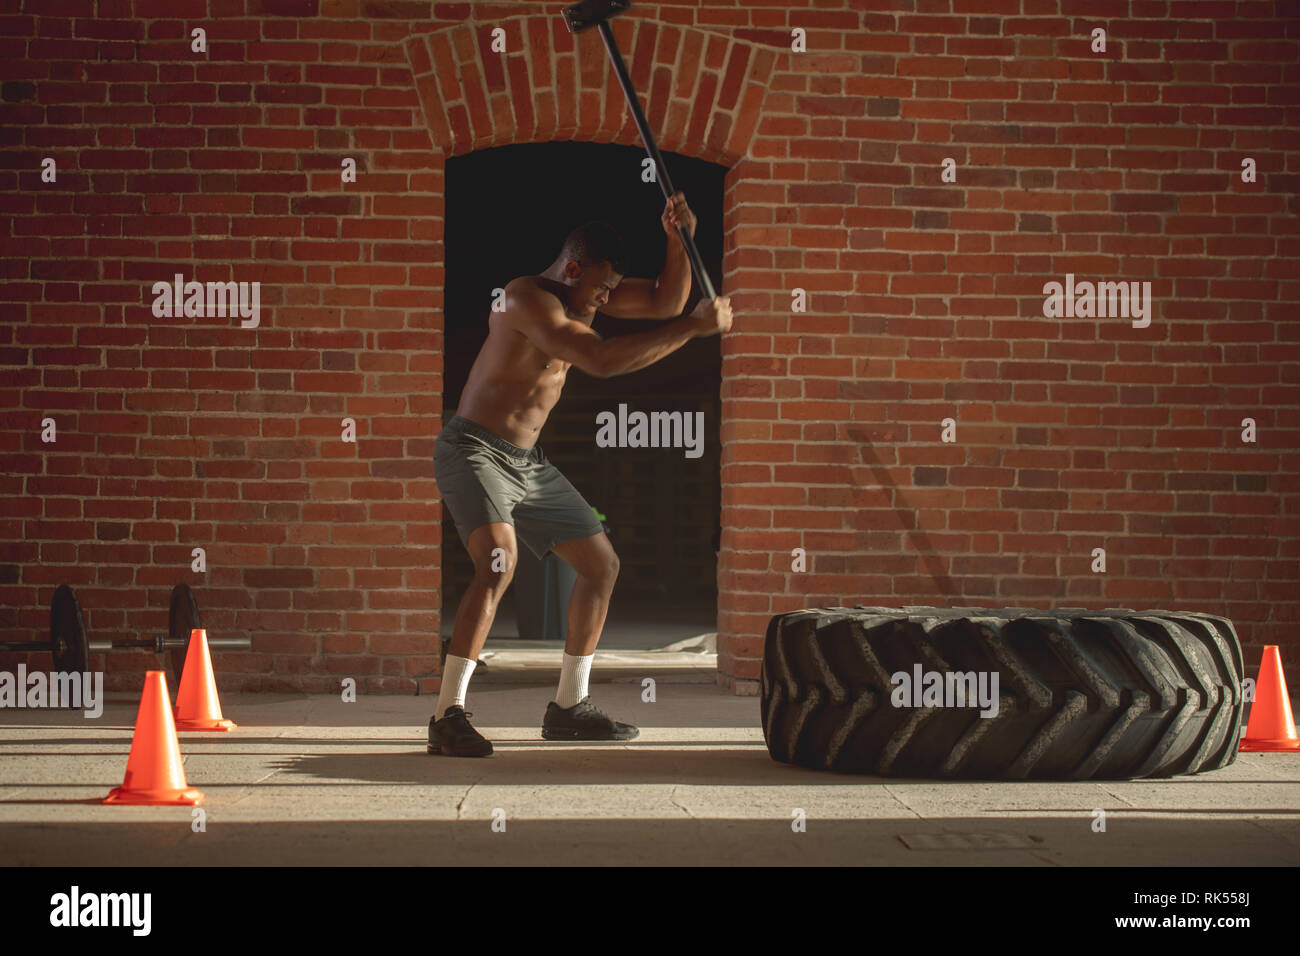 Crossfit Sledge Hammer Man Workout High Resolution Stock Photography and  Images - Alamy